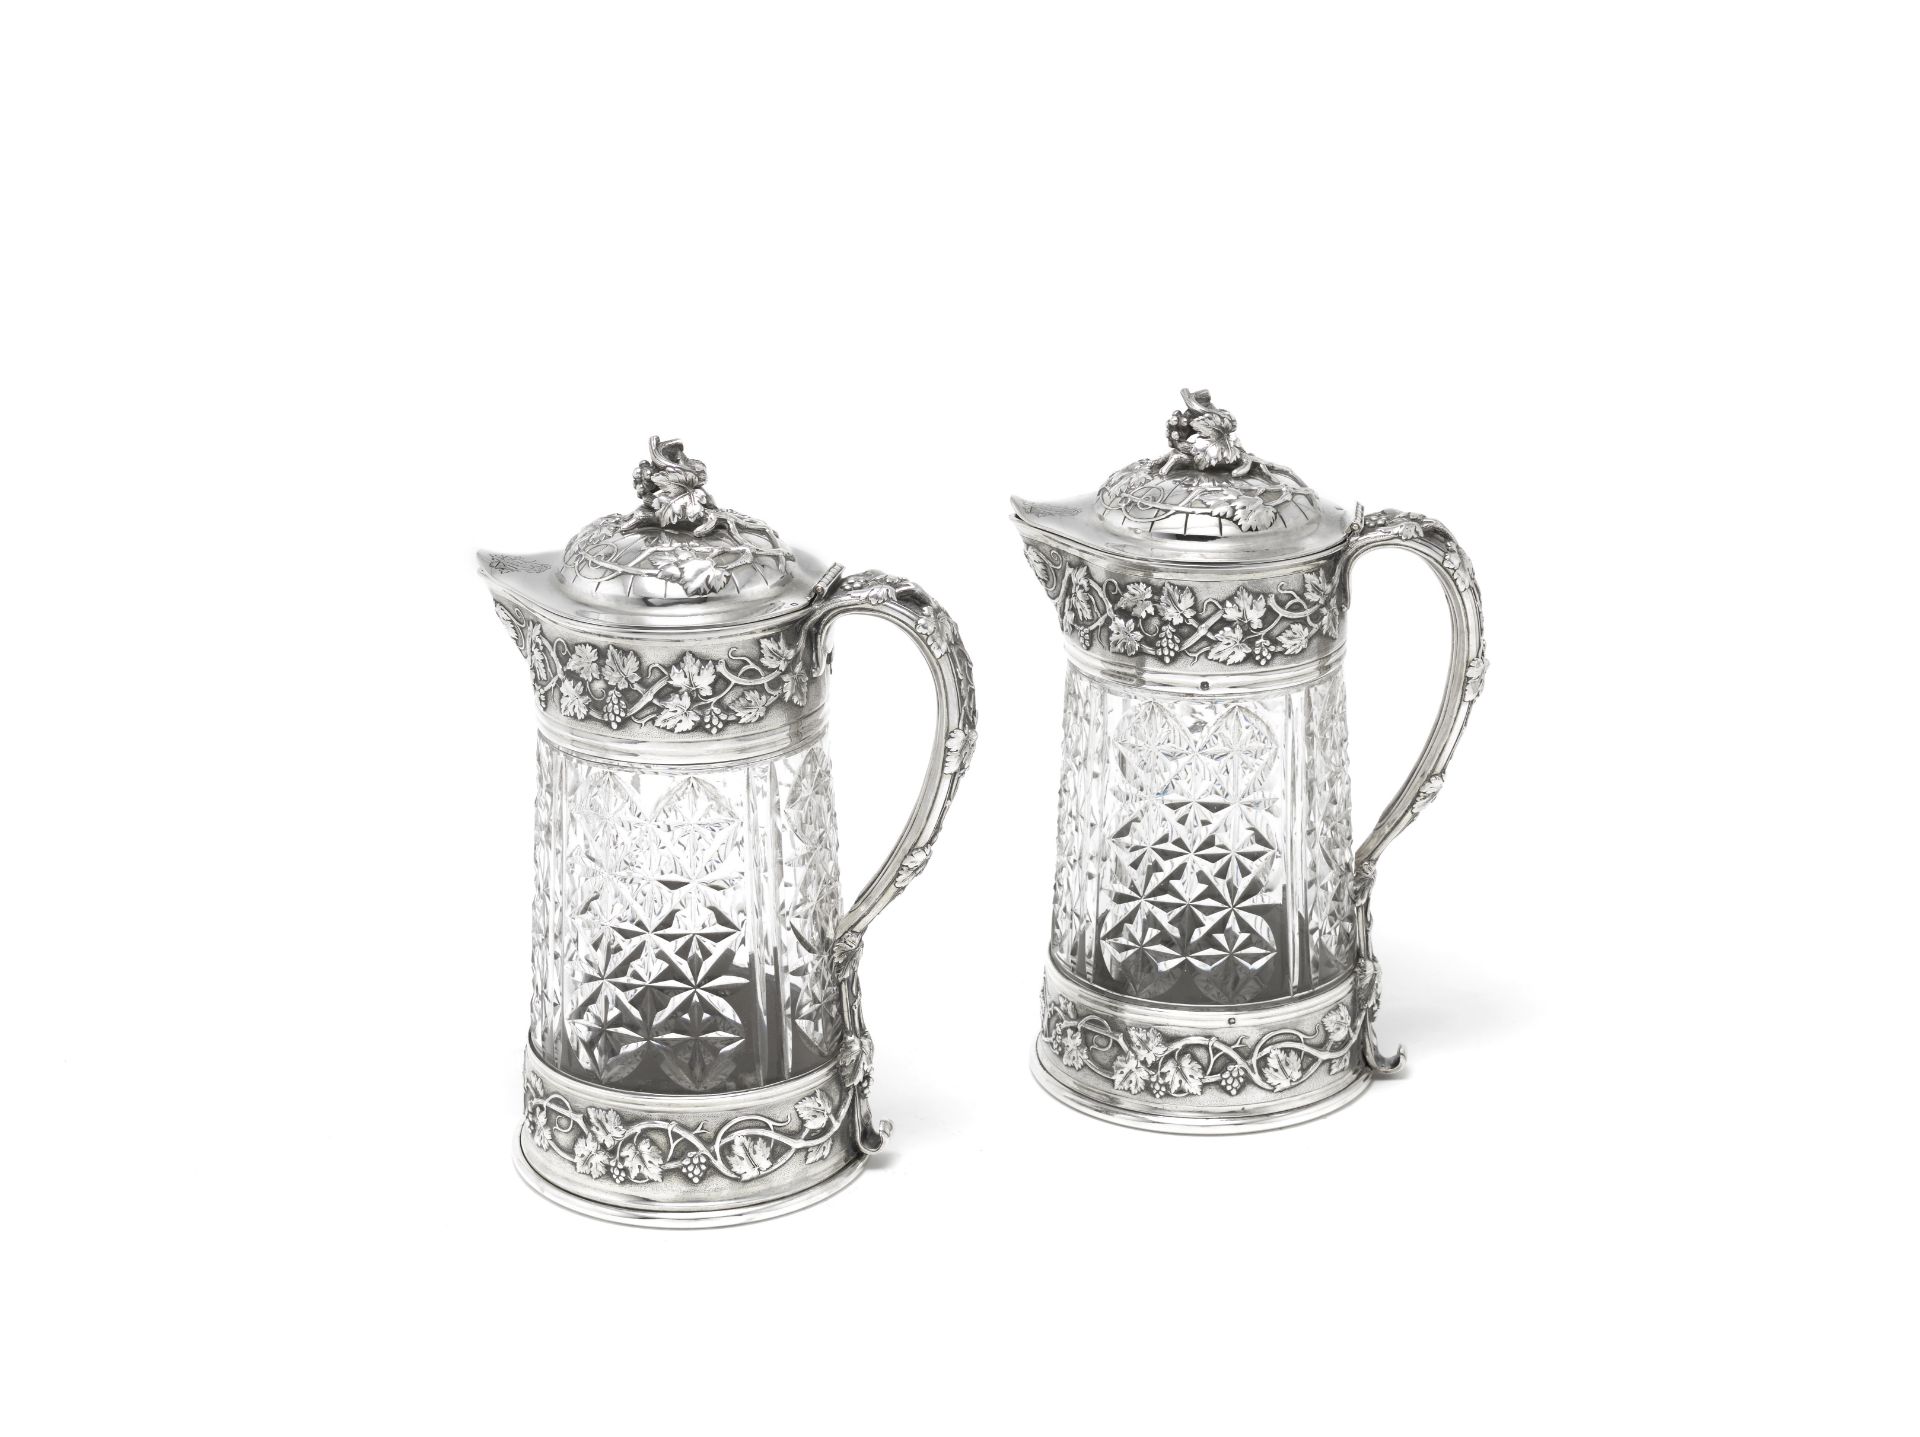 A pair of large French silver-mounted claret jugs Odiot, Paris late 19th century (2)